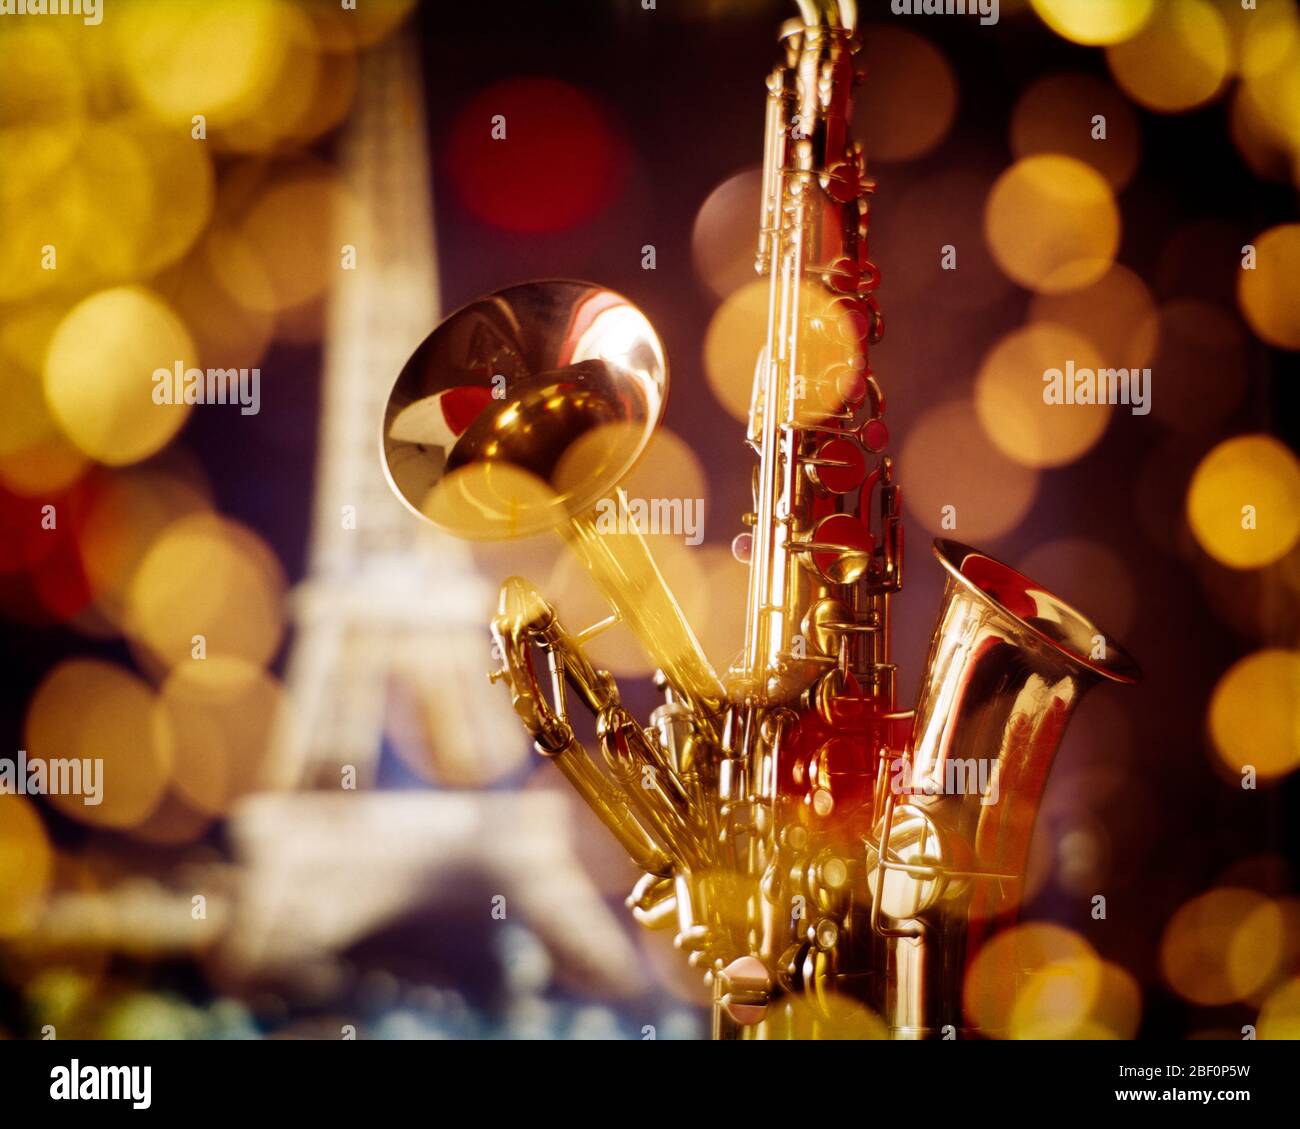 1980s SYMBOLIC JAZZ STILL LIFE BRASS MUSICAL INSTRUMENTS SAXOPHONE TRUMPET EIFFEL TOWER AND GOLDEN LIGHTS OF PARIS IN BACKGROUND - km7050 PHT001 HARS JAZZ TRIP AND GETAWAY COMPOSITE EXCITEMENT IN OF HOLIDAYS SAXOPHONE MUSICAL INSTRUMENT CONCEPT CONCEPTUAL STILL LIFE STYLISH SYMBOLIC CONCEPTS CREATIVITY NIGHTLIFE VACATIONS WILDLIFE EIFFEL TOWER OLD FASHIONED REPRESENTATION Stock Photo